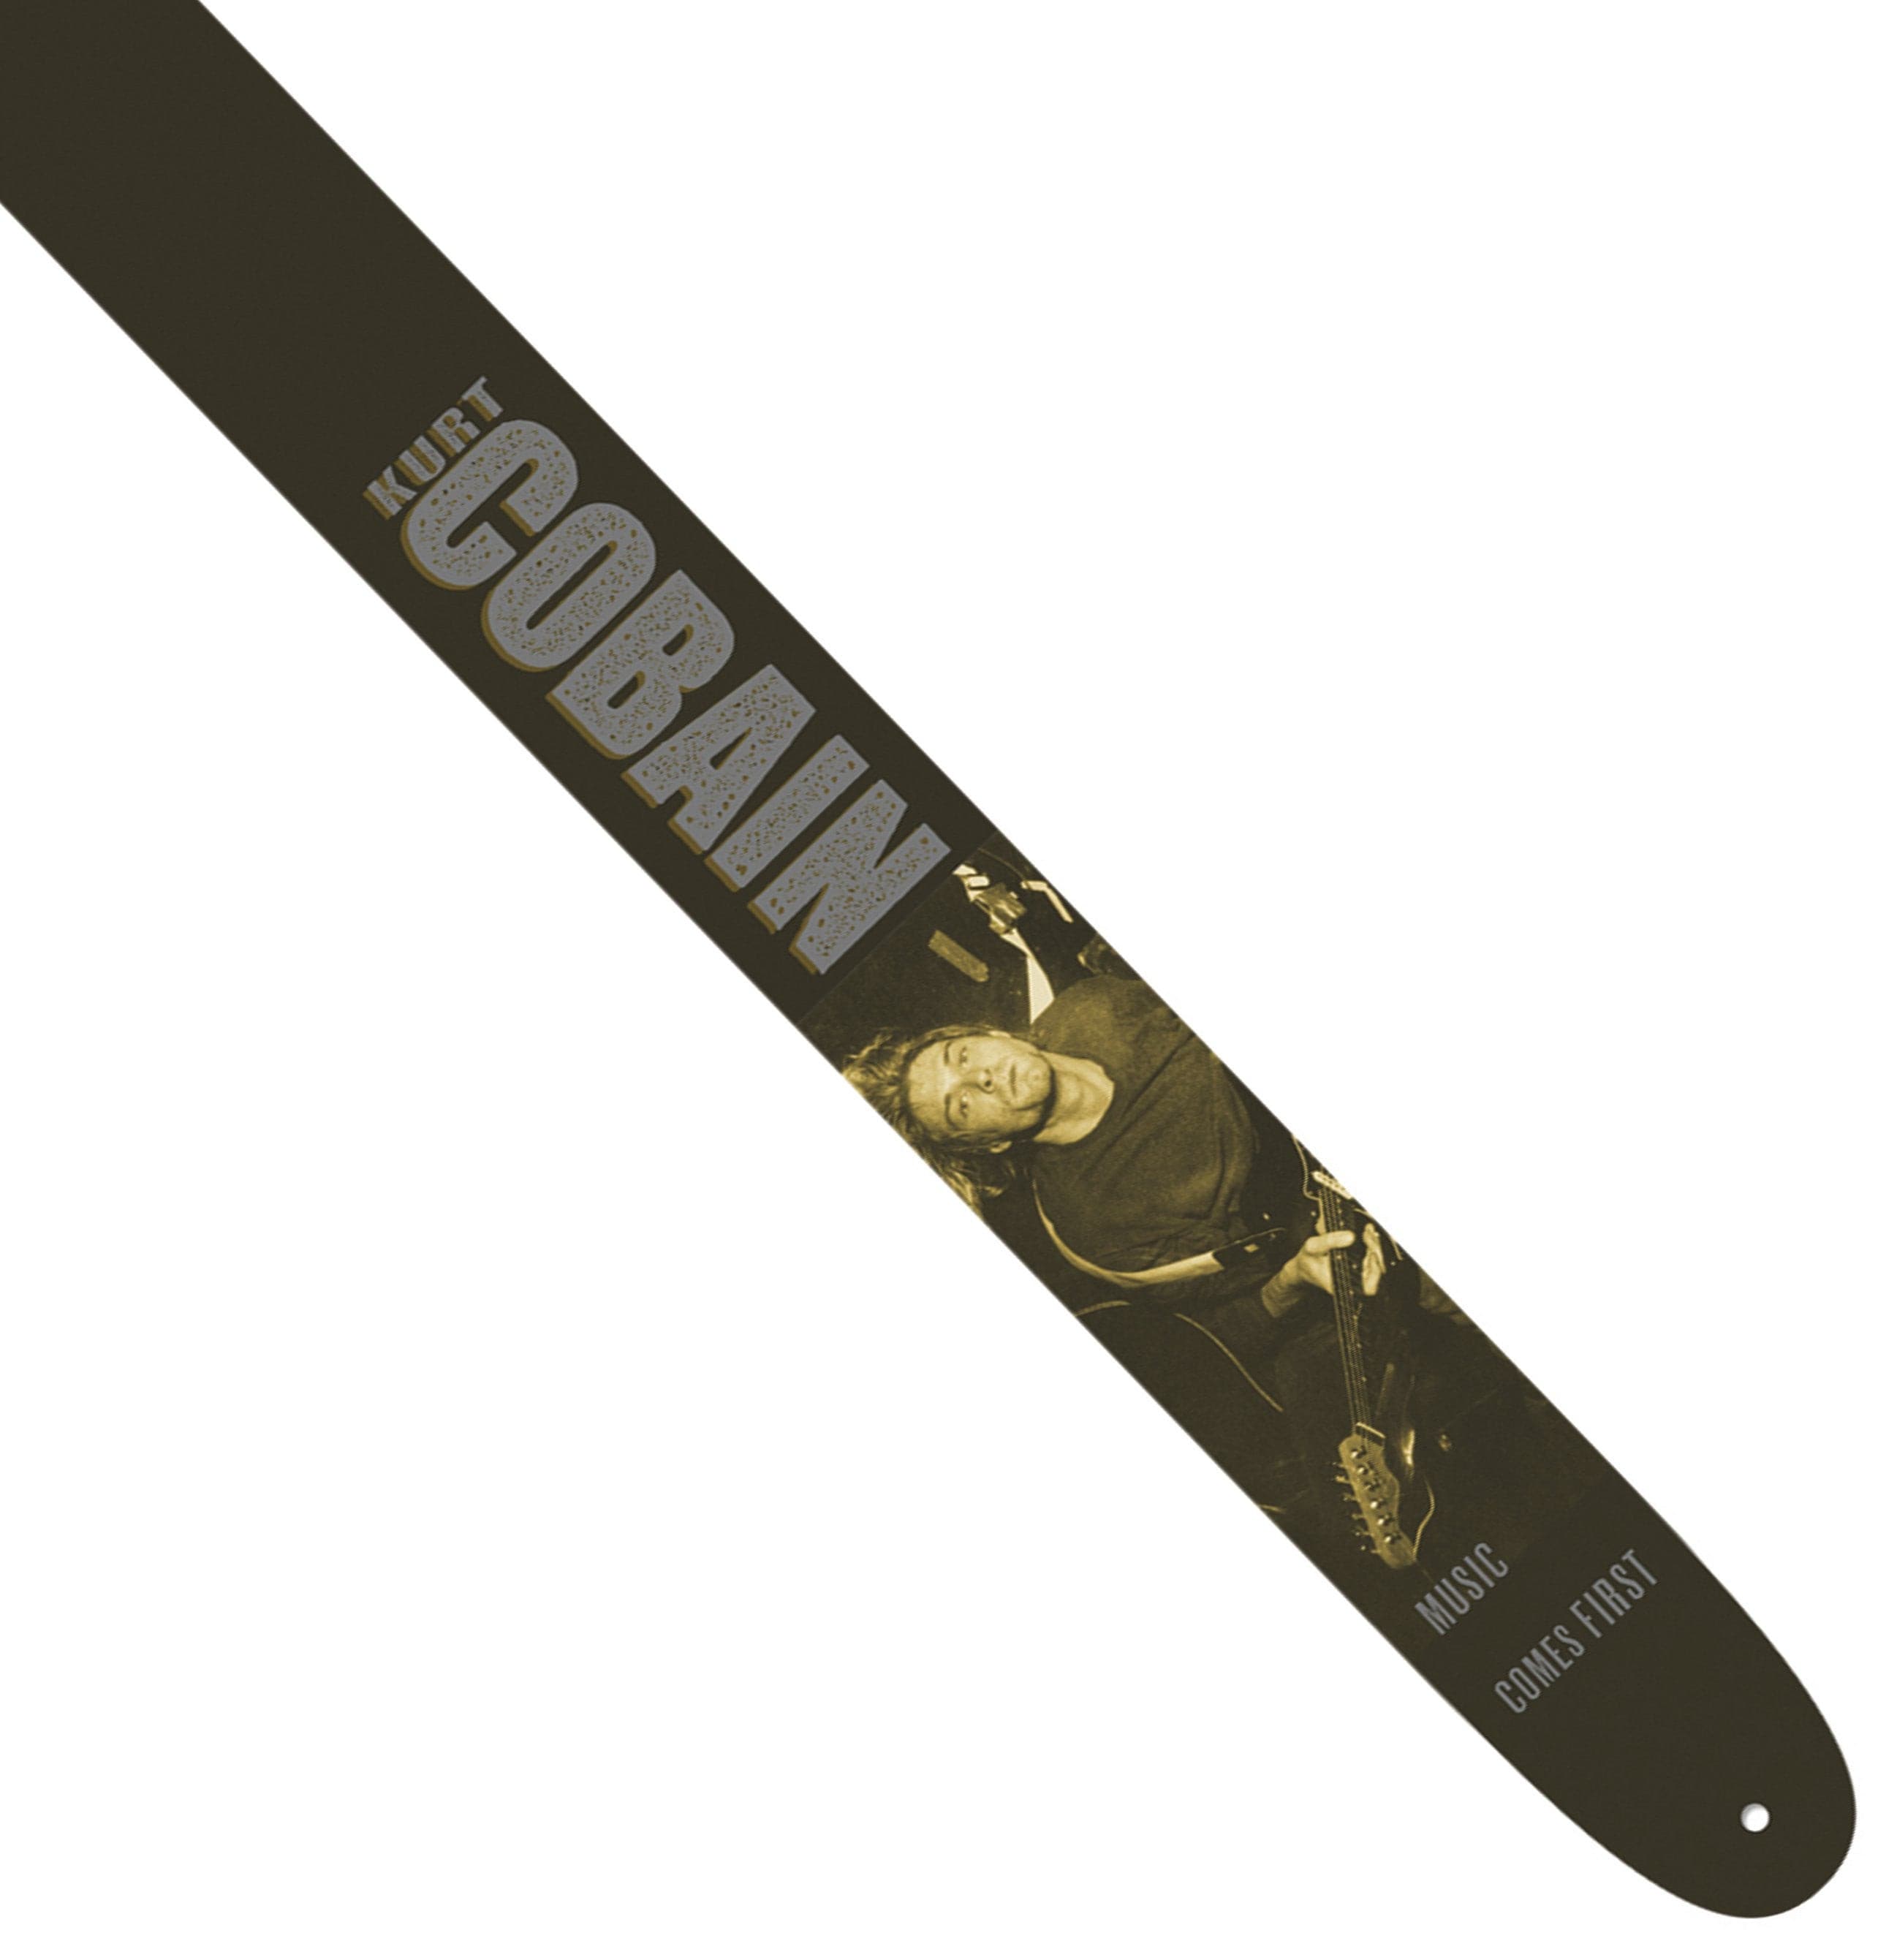 Perri's Leather Guitar Strap ~ Nirvana ~ Cobain, Accessory for sale at Richards Guitars.